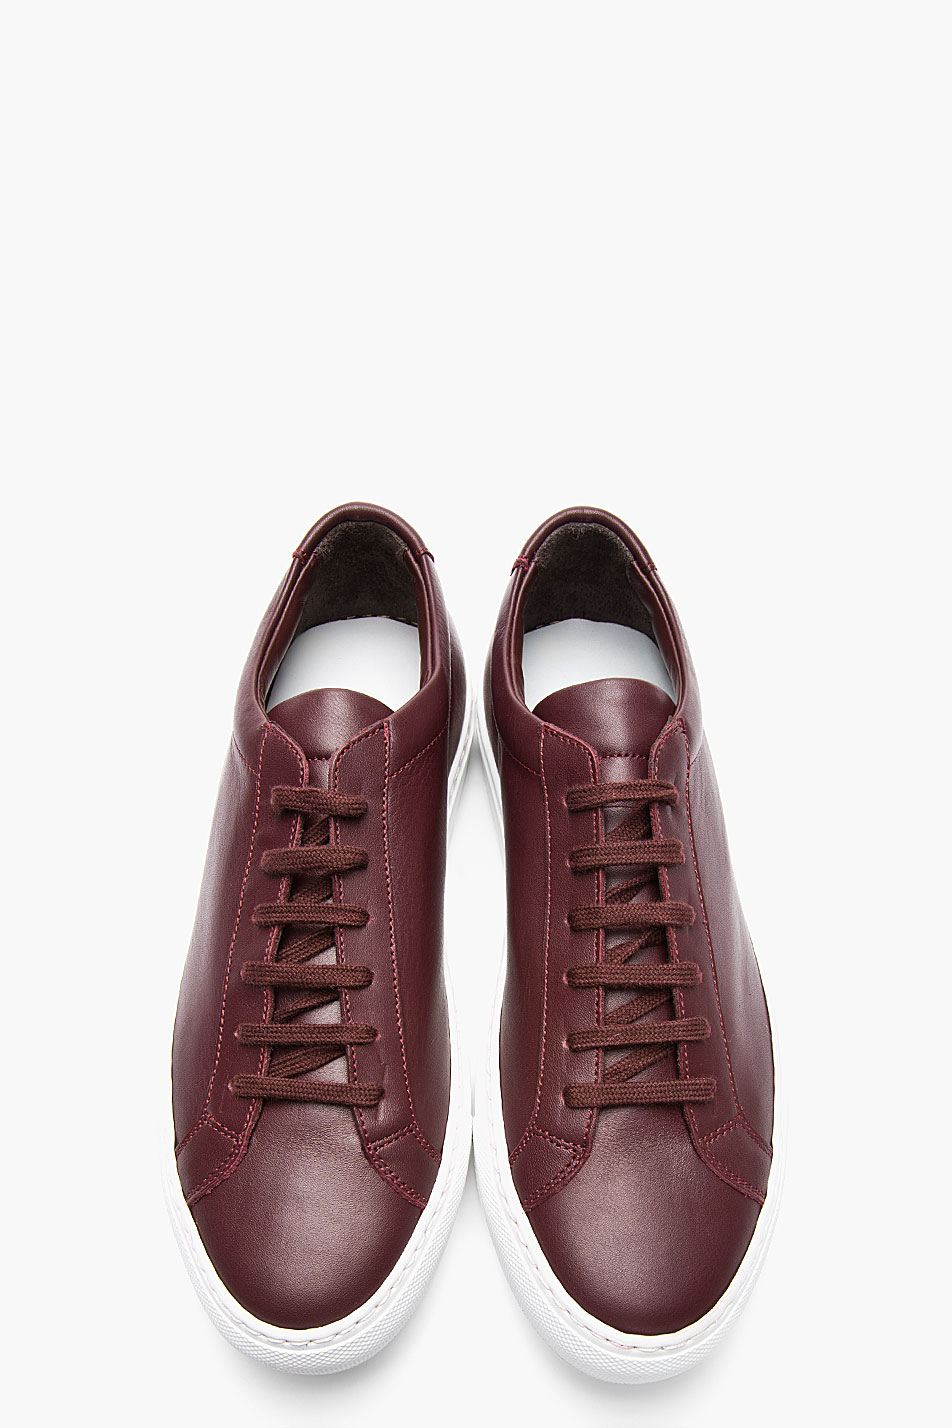 Common Projects Burgundy Leather Achilles Low_top Sneakers in Red for Men -  Lyst